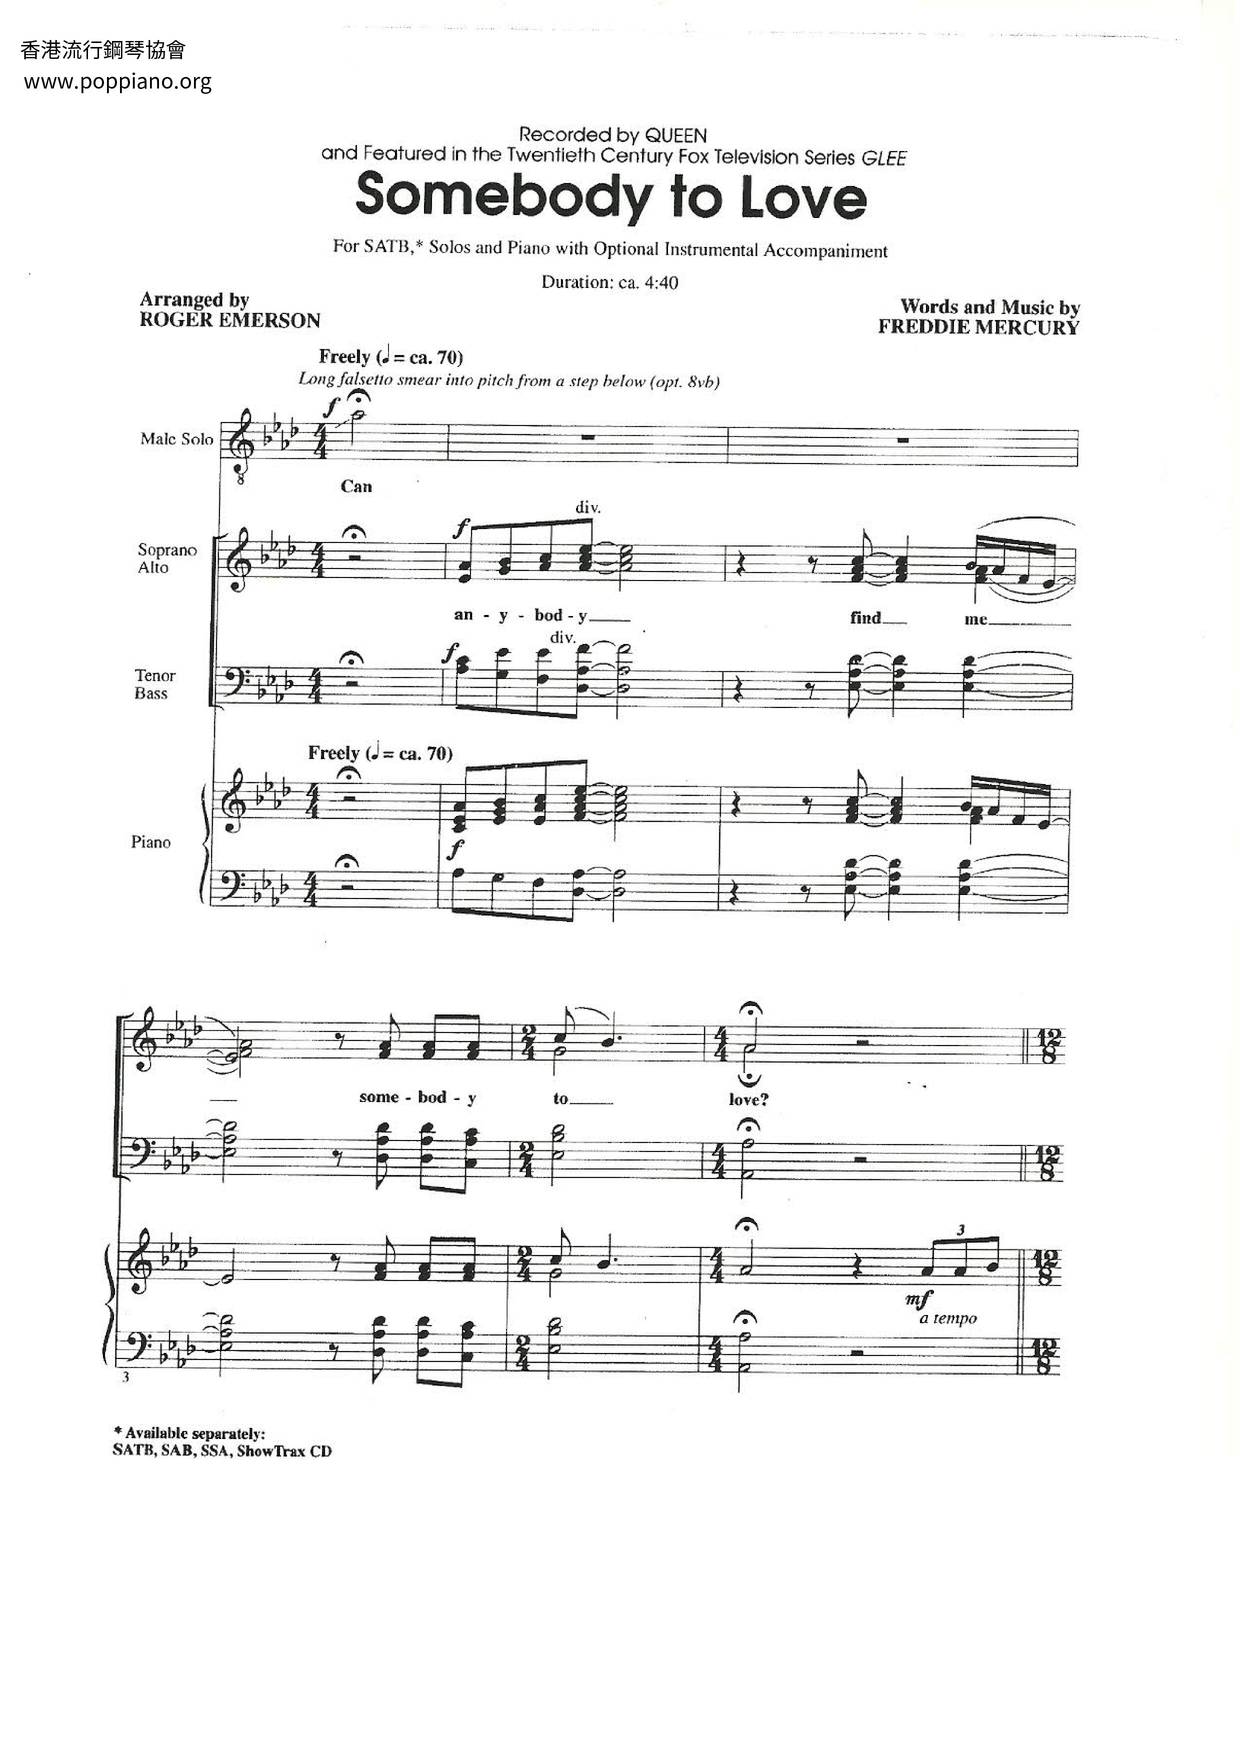 ☆ Queen-Somebody To Love Sheet Music (クイーン) Free Download ☆